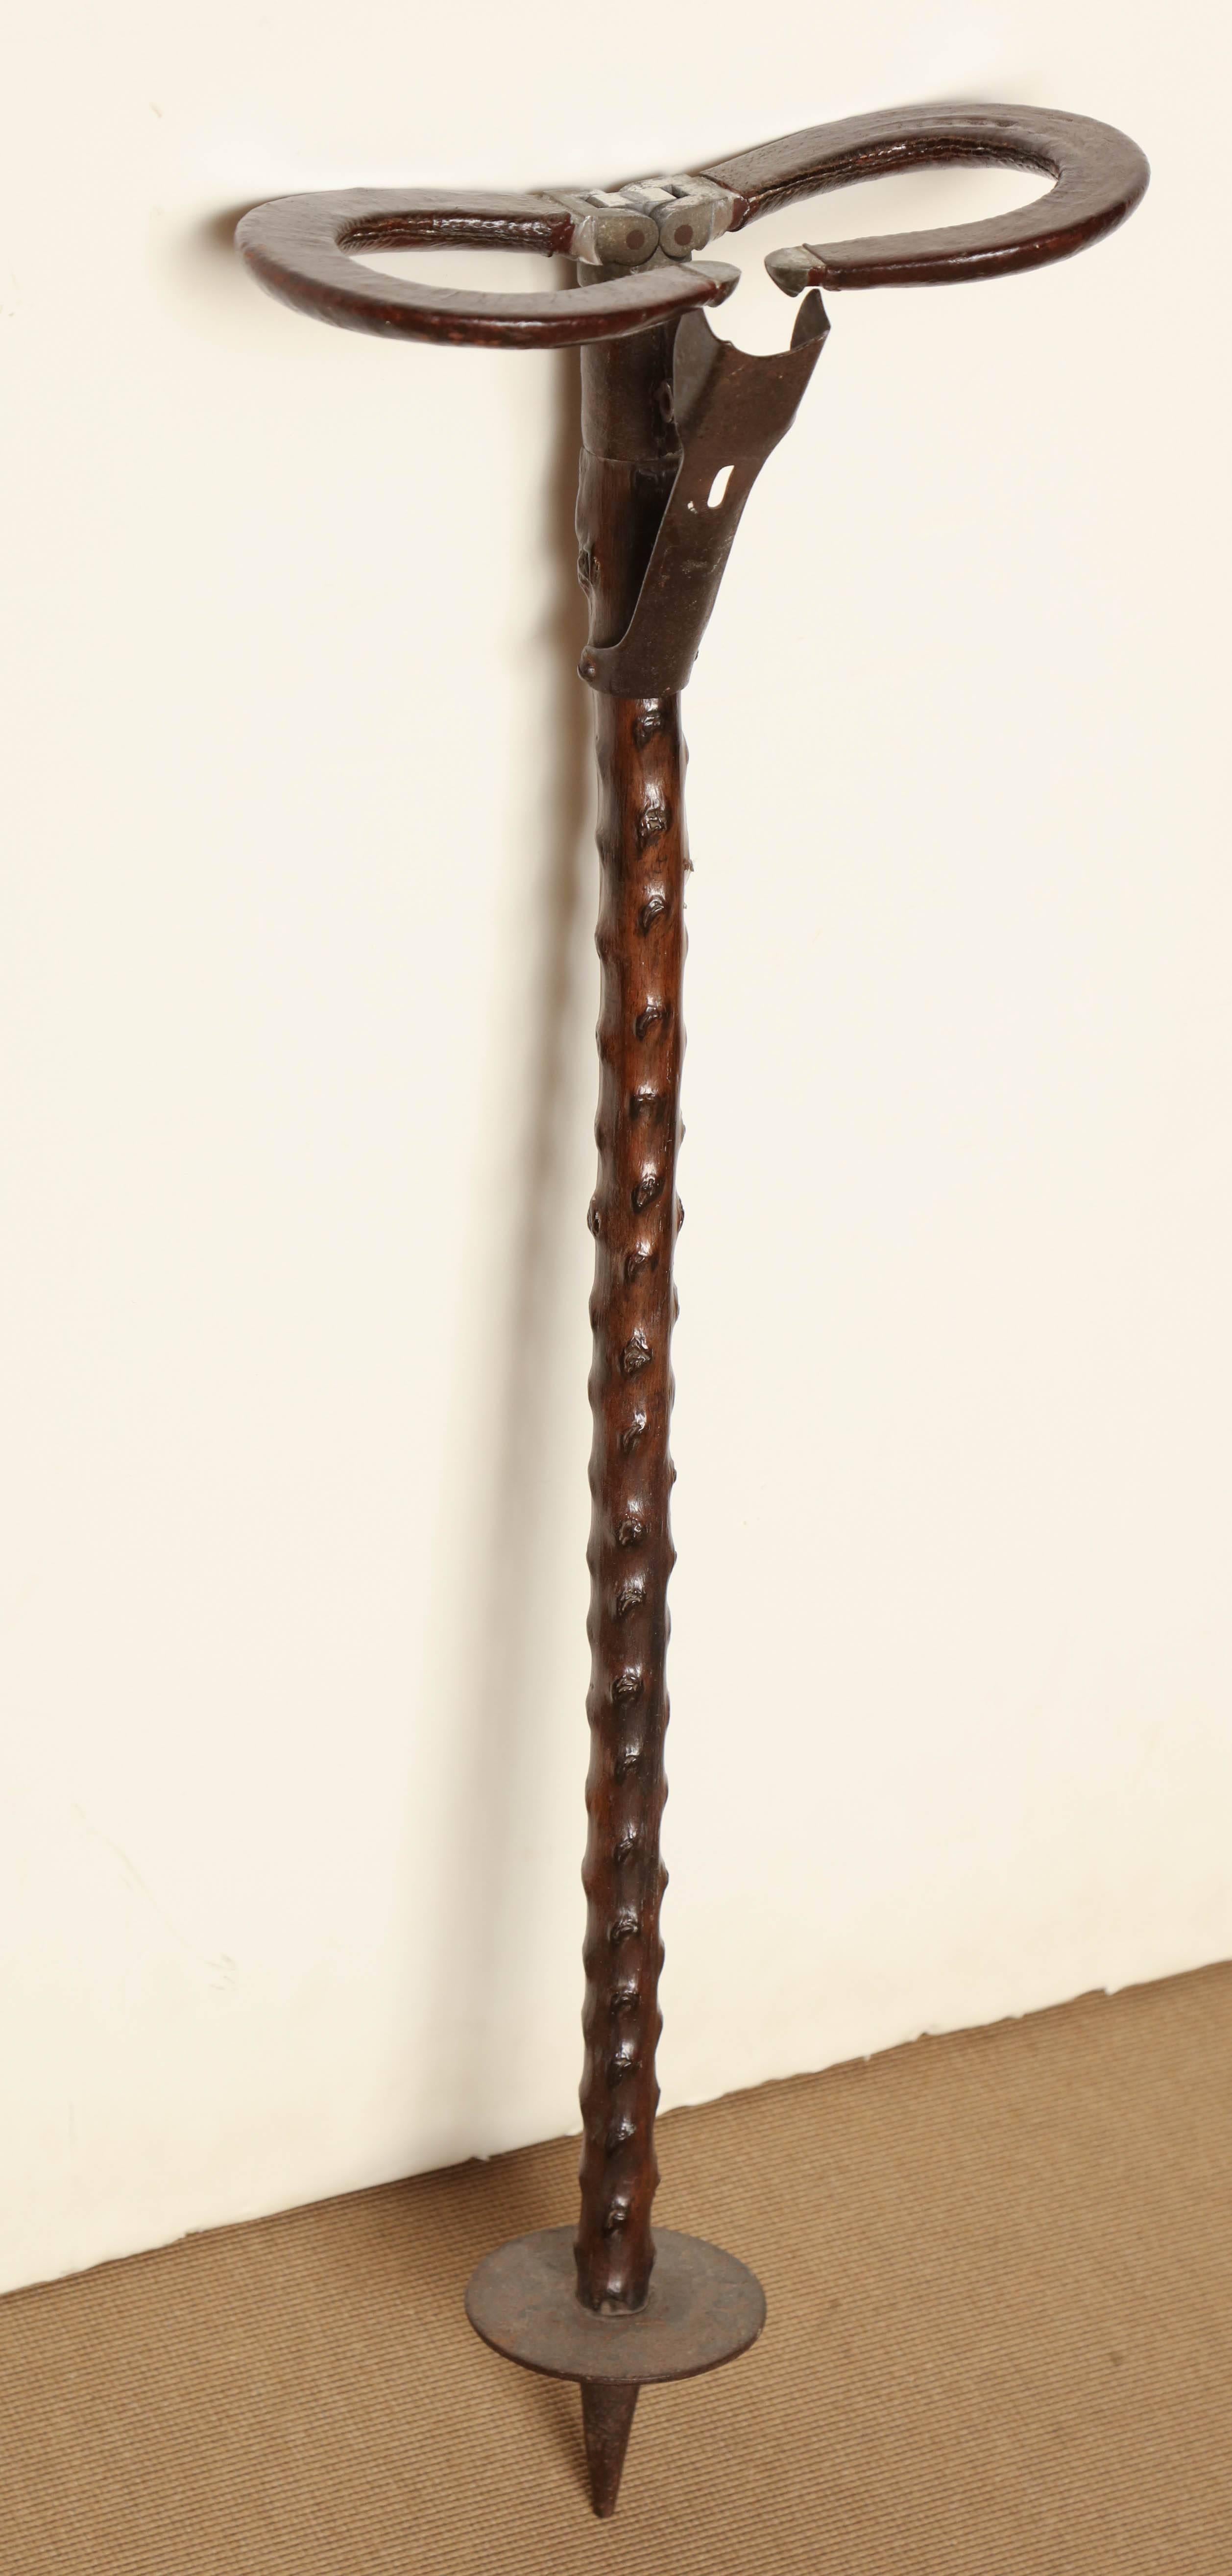 Mid-19th century shooting stick.
Folding handle wrapped in leather on a briar shaft.